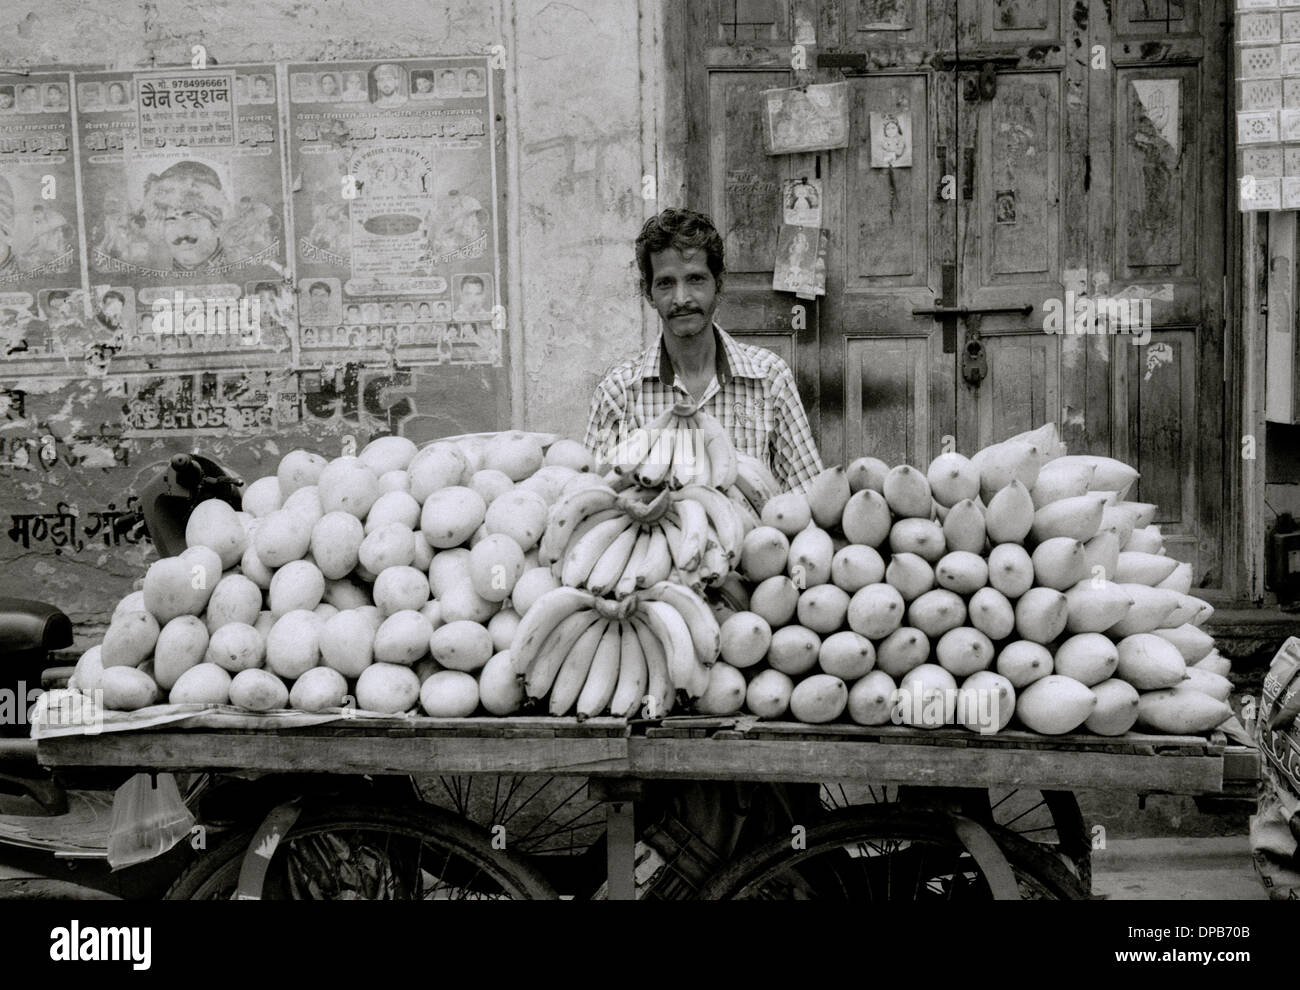 A fruit seller stall at the market in Udaipur in Rajasthan in India in South Asia. Business Trade Food Portrait Street Markets Urban Life Occupation Stock Photo